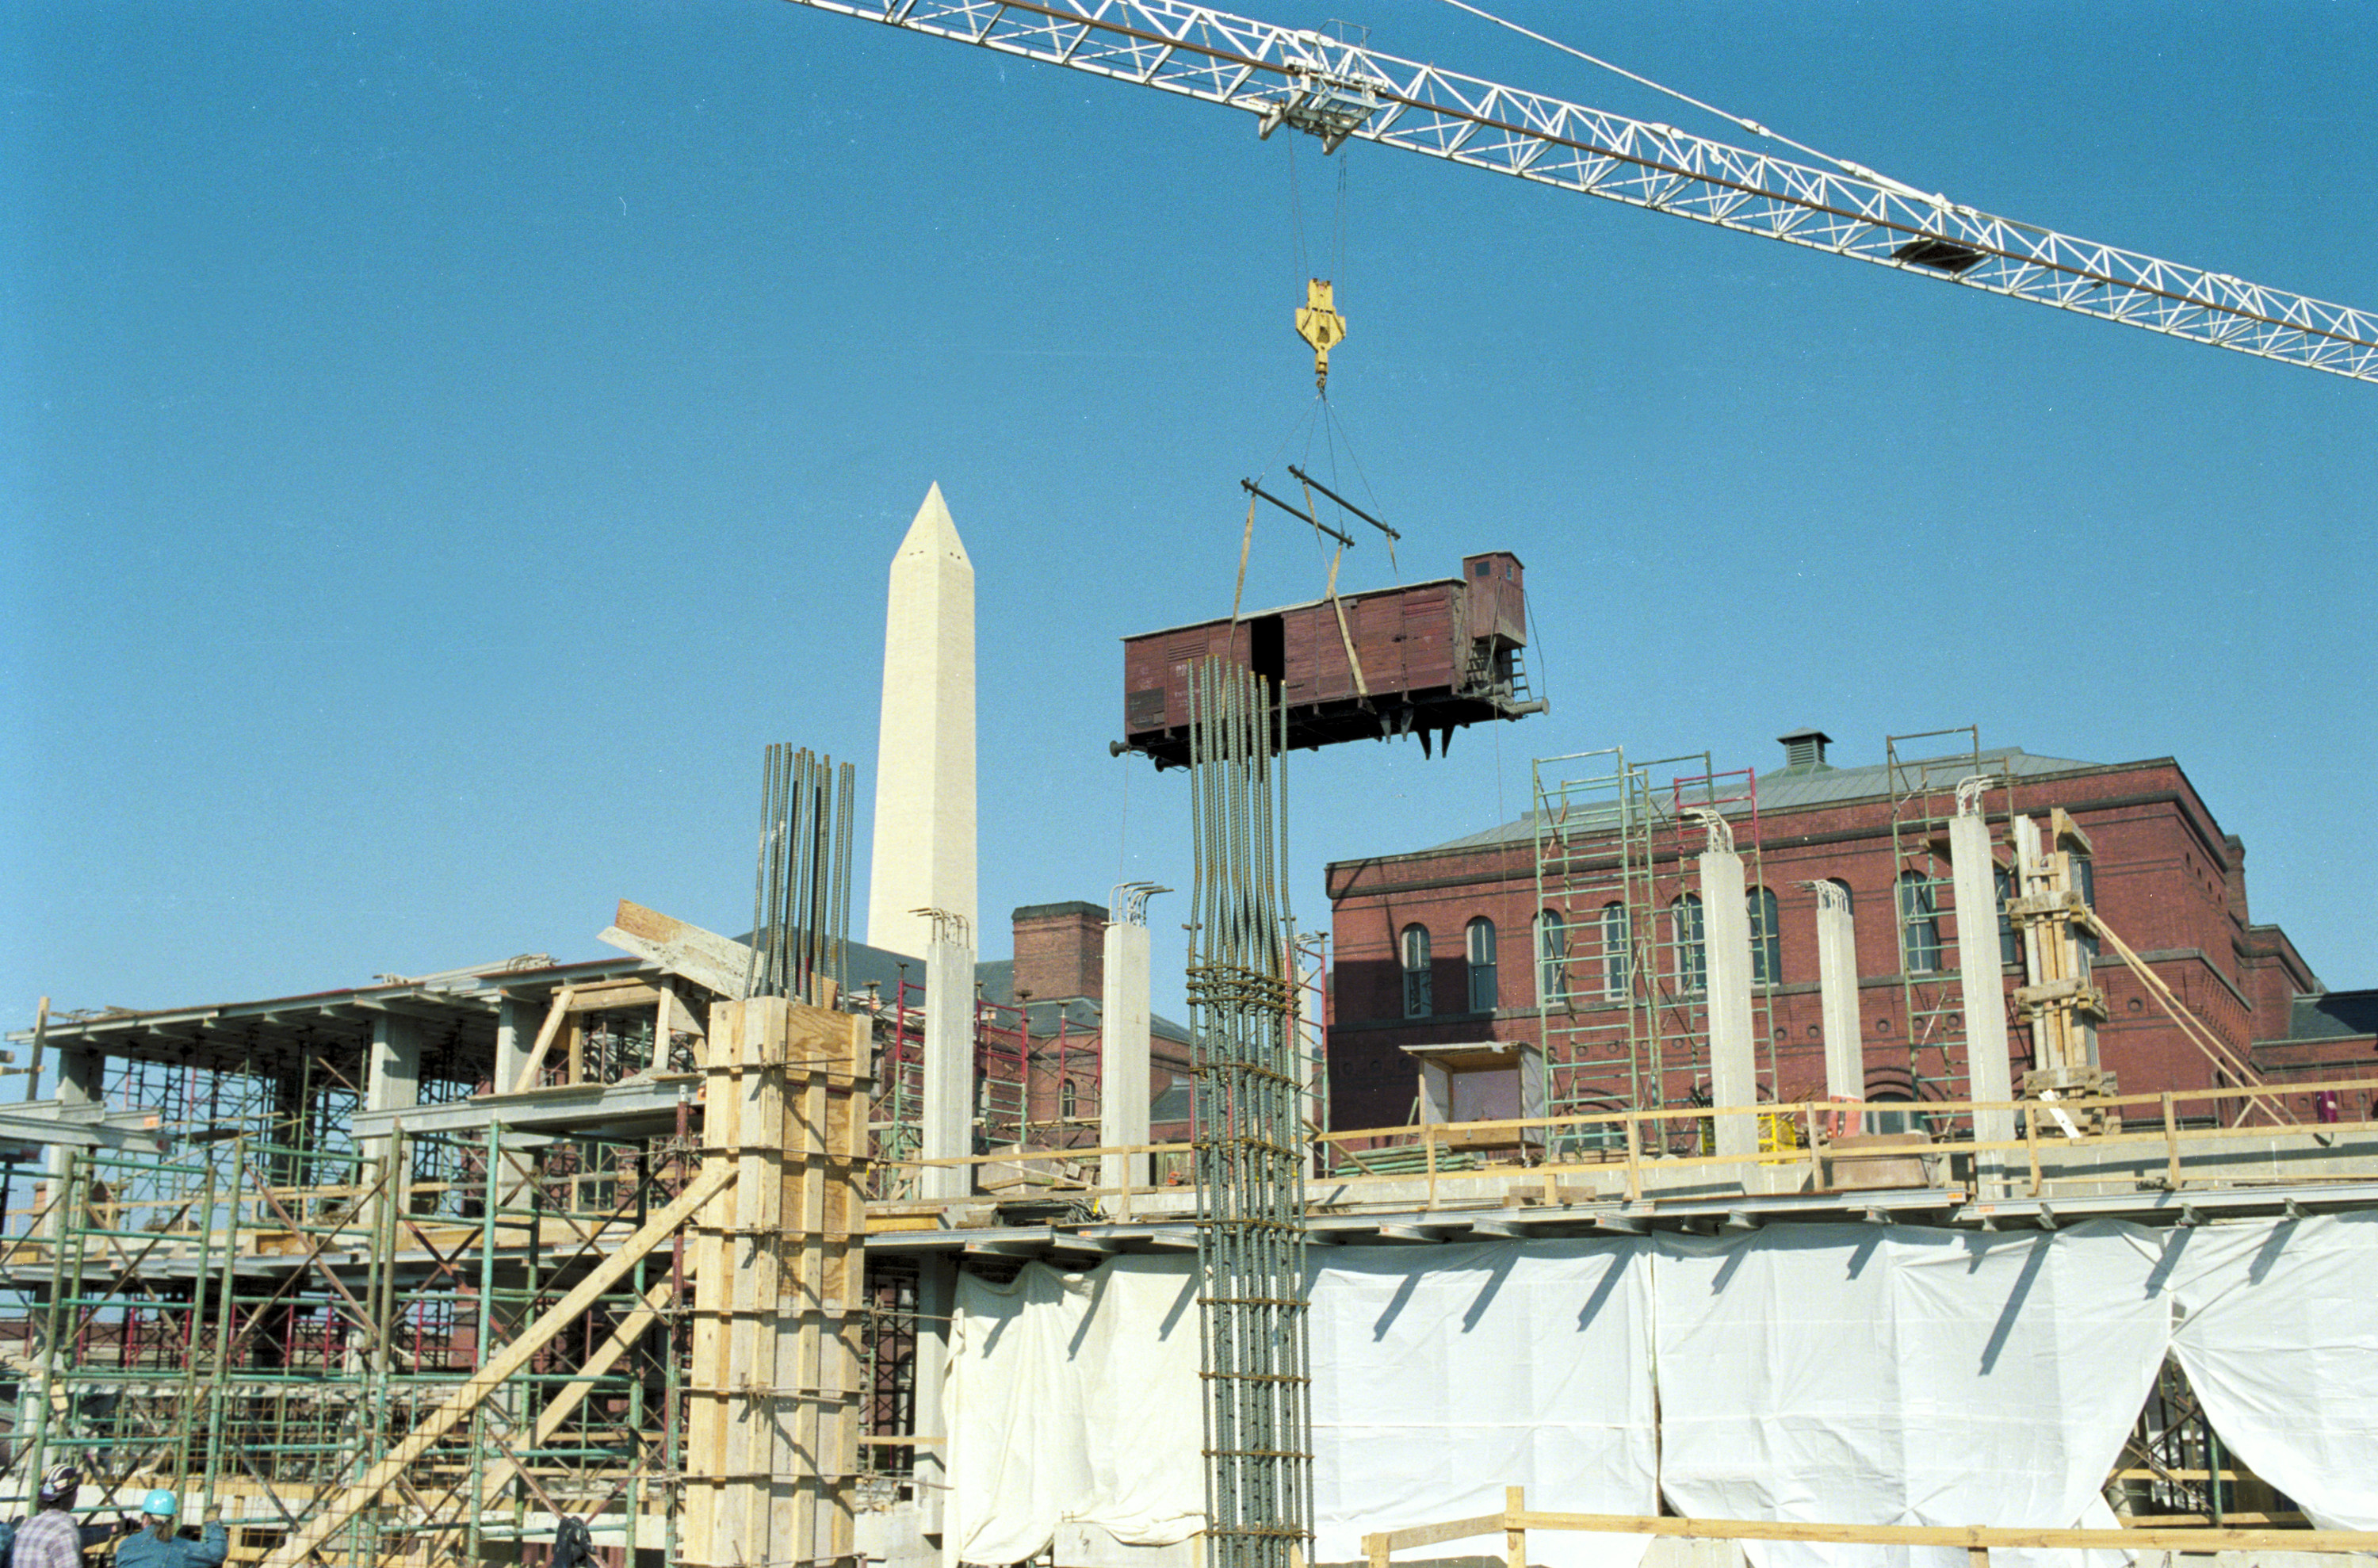 Installation of the railcar at the construction site of the U.S. Holocaust Memorial Museum.